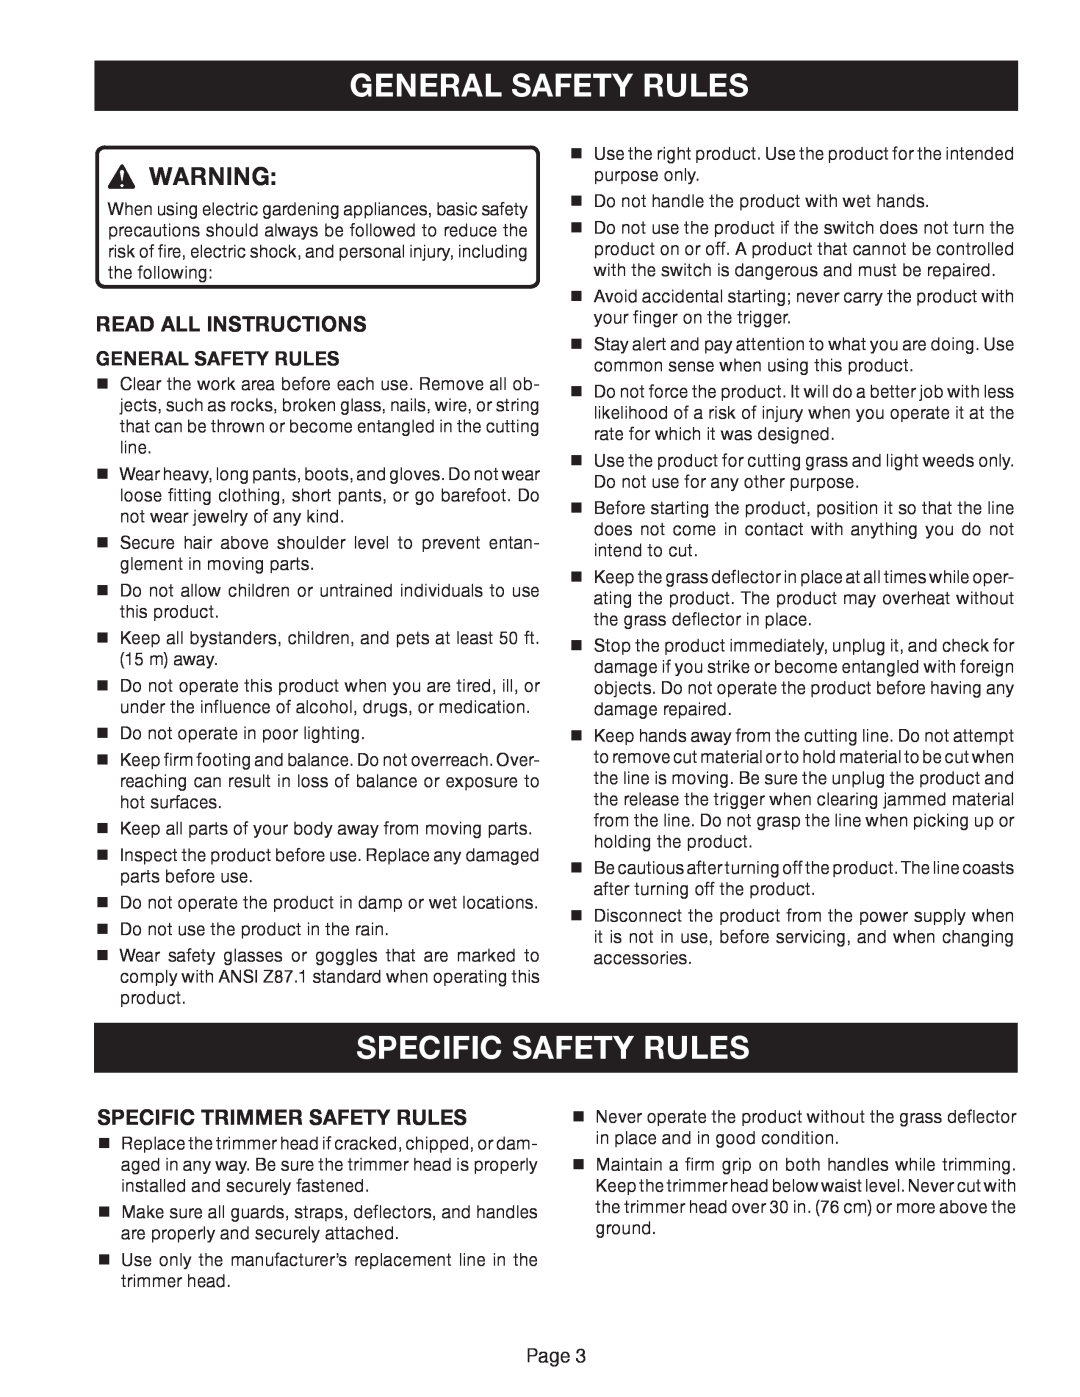 Ryobi RY41002A General Safety Rules, Specific Safety Rules, Read All Instructions, Specific Trimmer Safety Rules, Page 